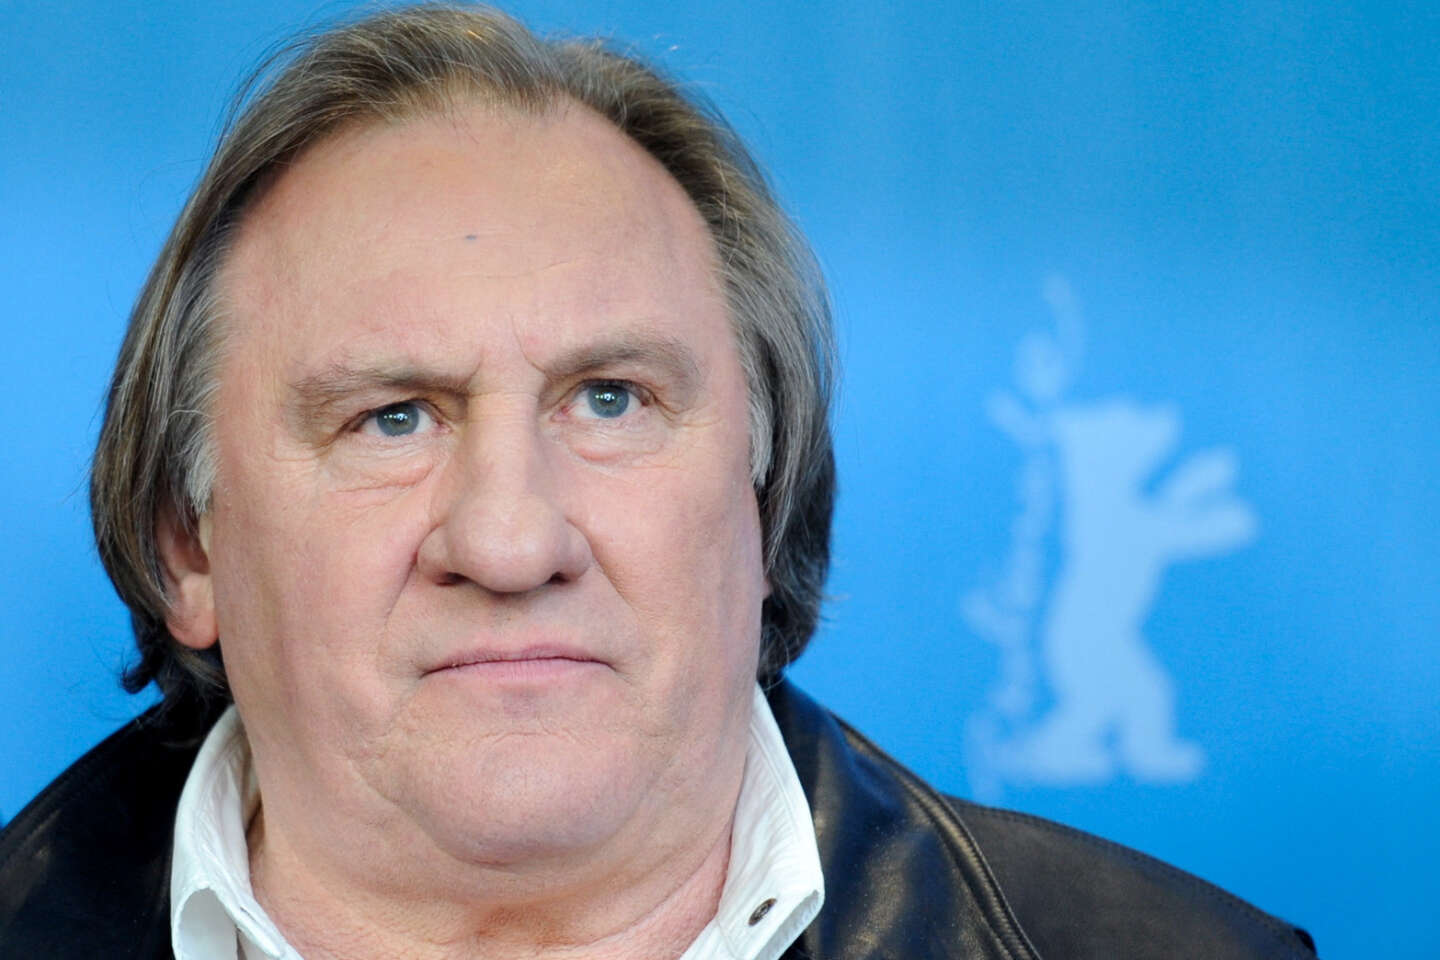 Tribune “faced with lynching” by Gérard Depardieu: the embarrassment of the signatories who nevertheless maintain their support for the actor